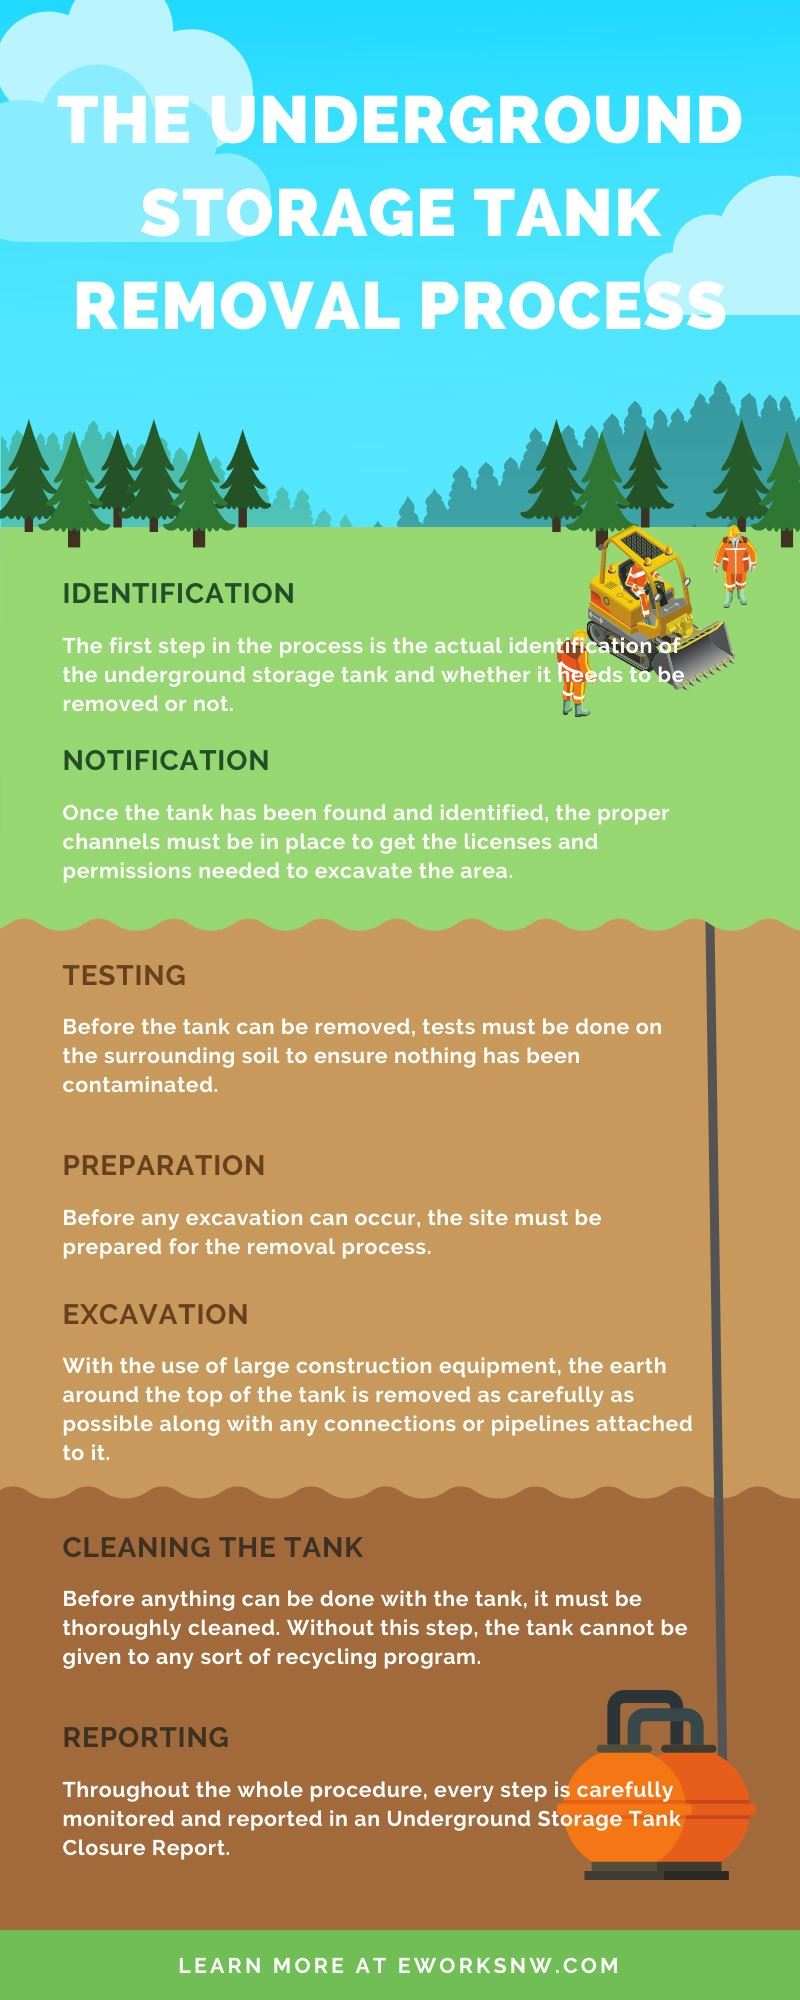 The Underground Storage Tank Removal Process in infographic form